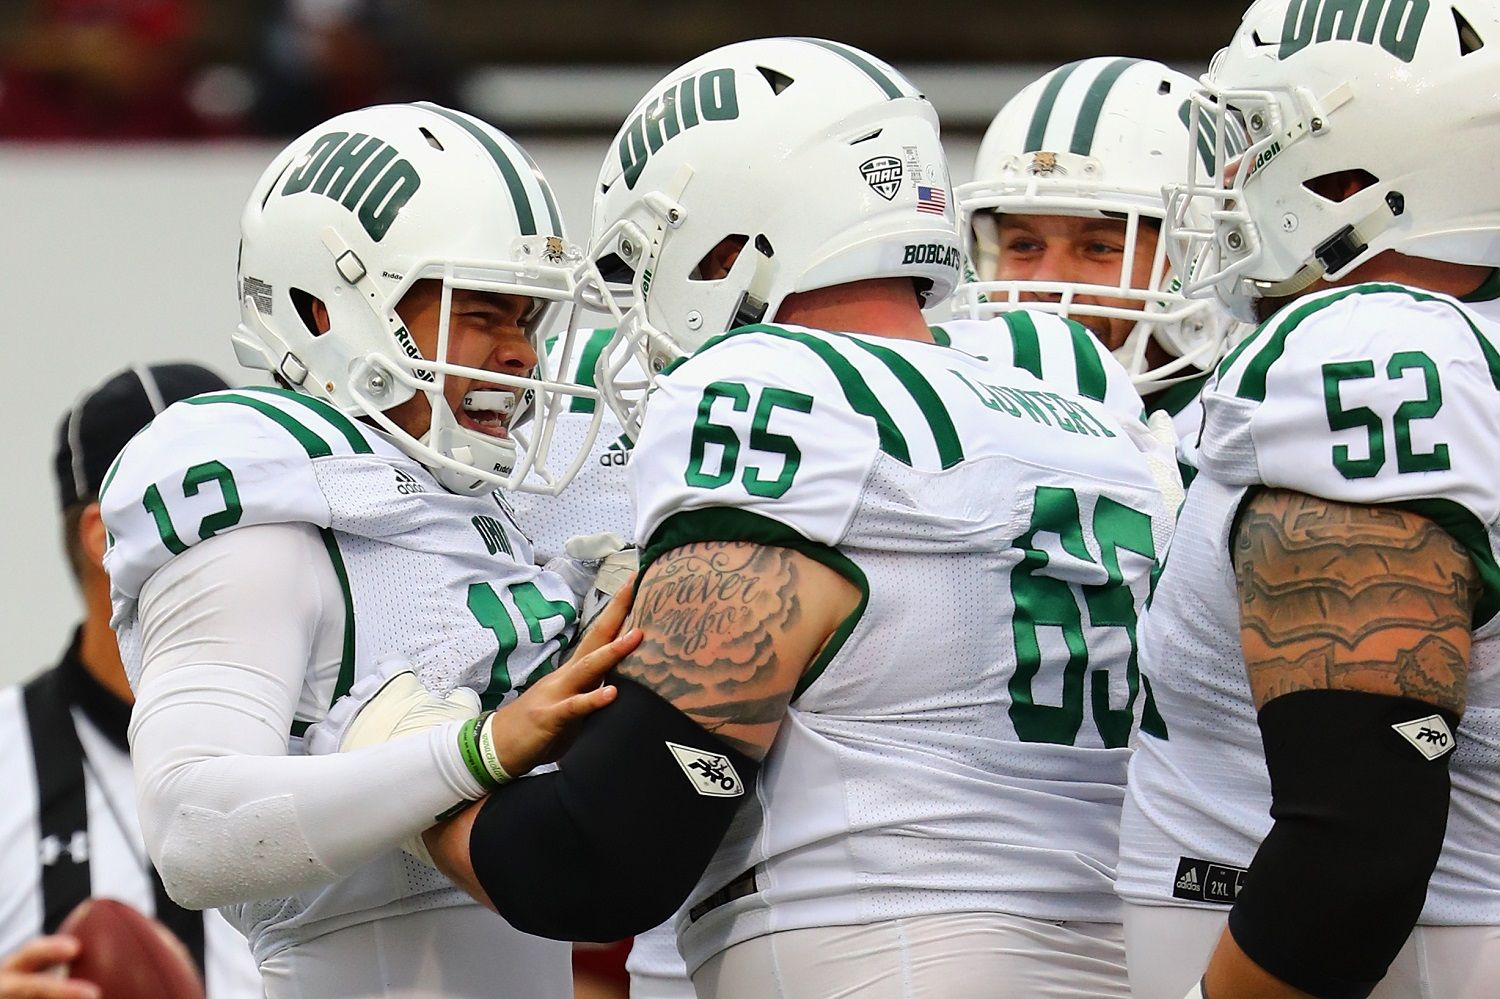 HADLEY, MA - SEPTEMBER 30:  Nathan Rourke #12 of the Ohio Bobcats celebrates with Joe Lowery #65 after scoring a touchdown during the second quarter against the Massachusetts Minutemen at Warren McGuirk Alumni Stadium on September 30, 2017 in Hadley, Massachusetts.  (Photo by Tim Bradbury/Getty Images)